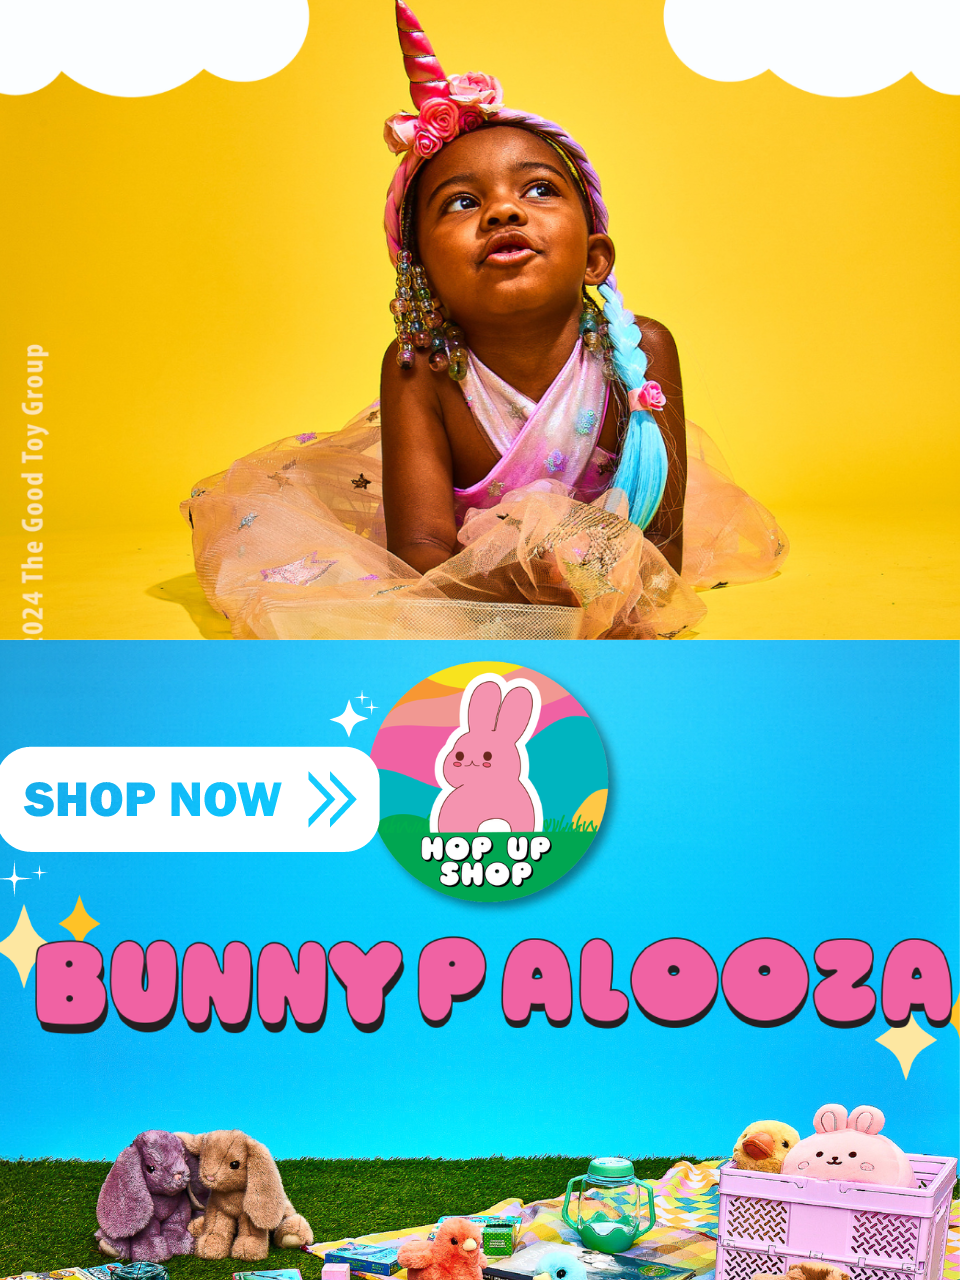 SHOP OUR EASTER COLLECTION